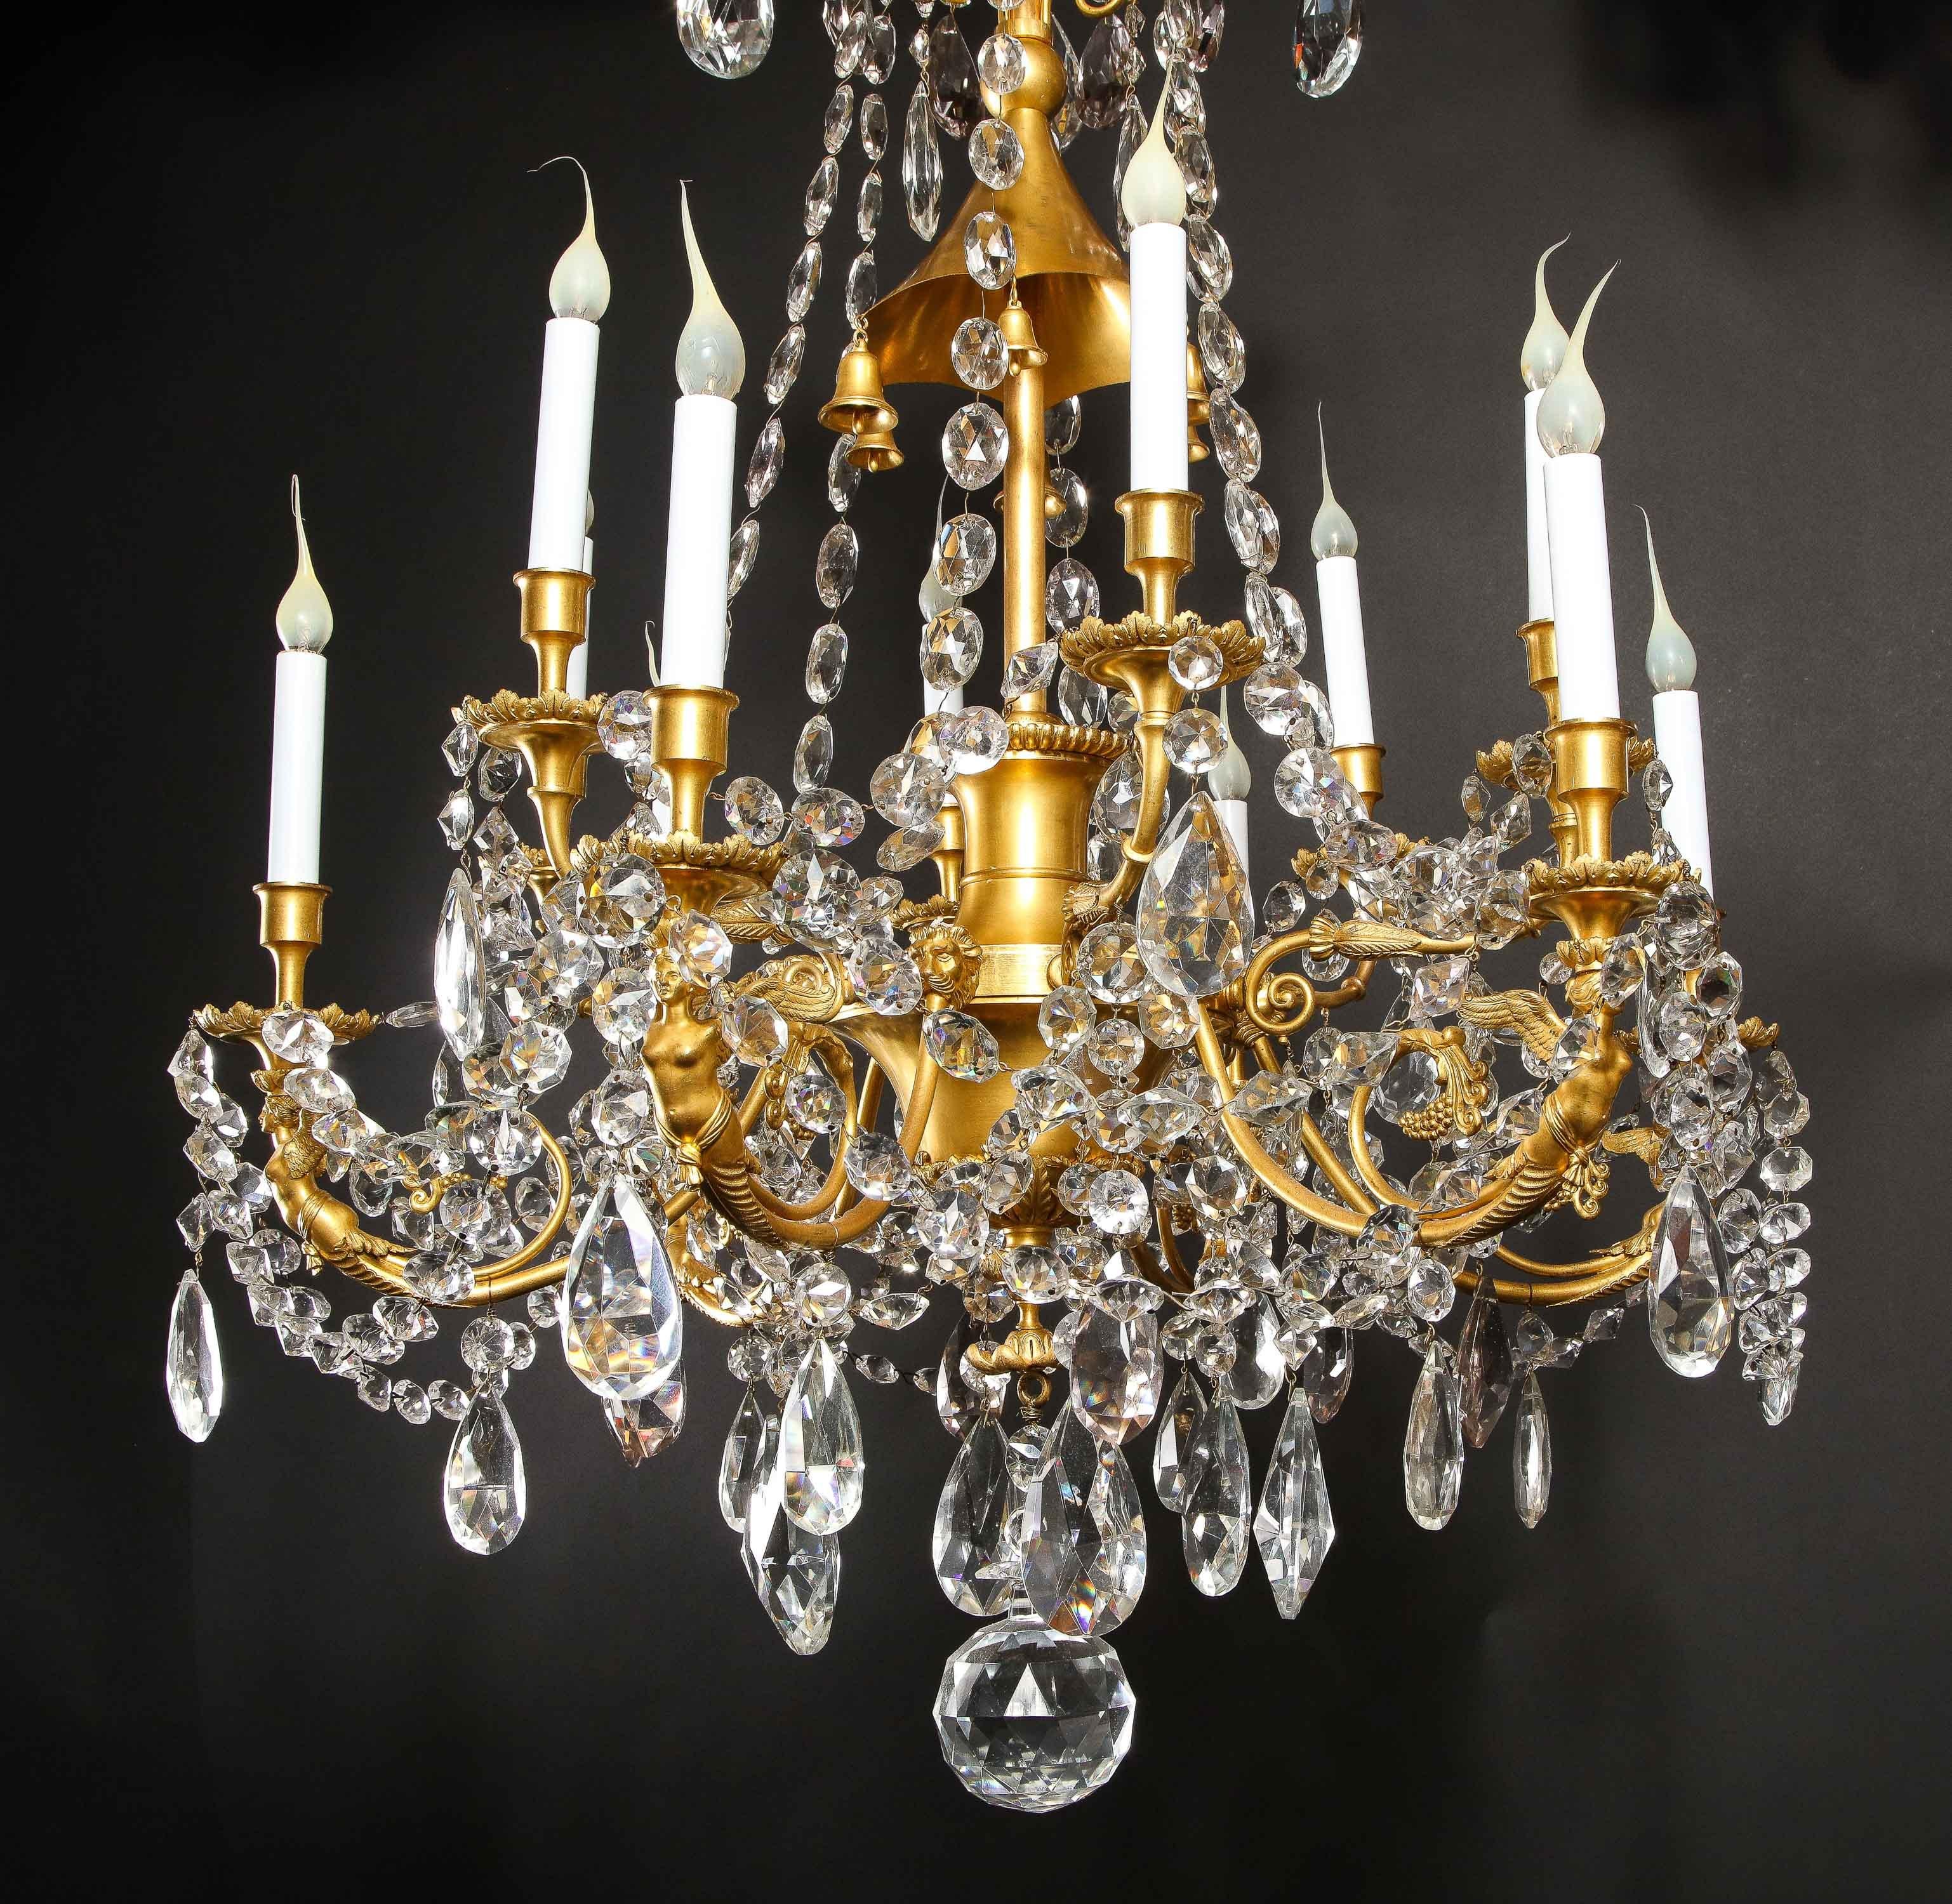 Spectacular Antique French Louis XVI Style Gilt Bronze and Crystal Chandelier For Sale 2